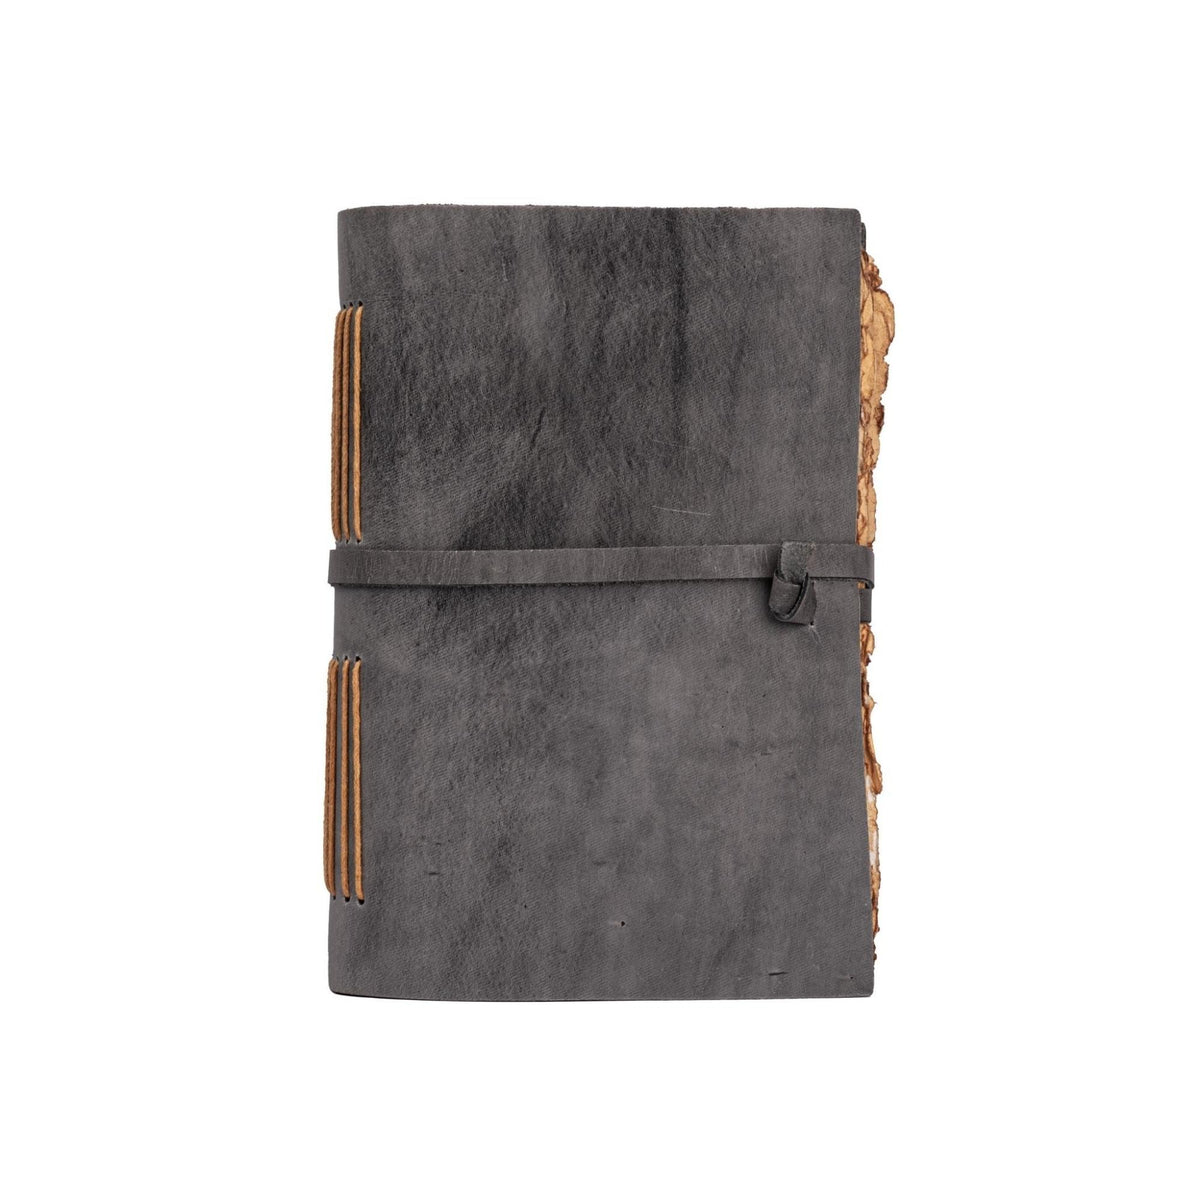 Leather Village grey  colour handmade  leather journal with strap